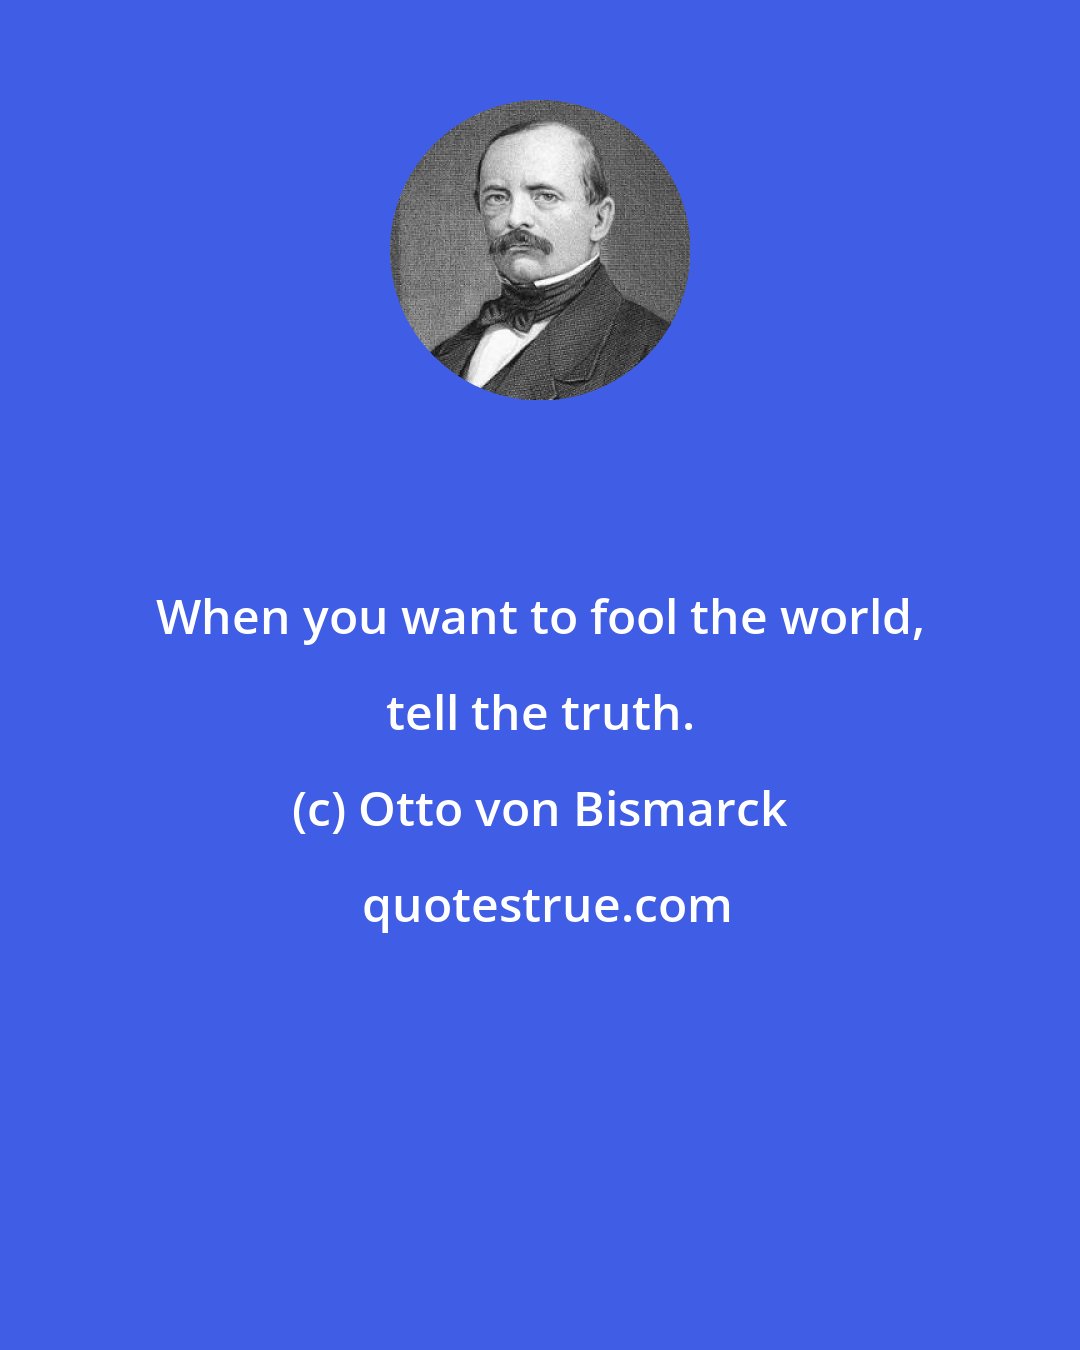 Otto von Bismarck: When you want to fool the world, tell the truth.